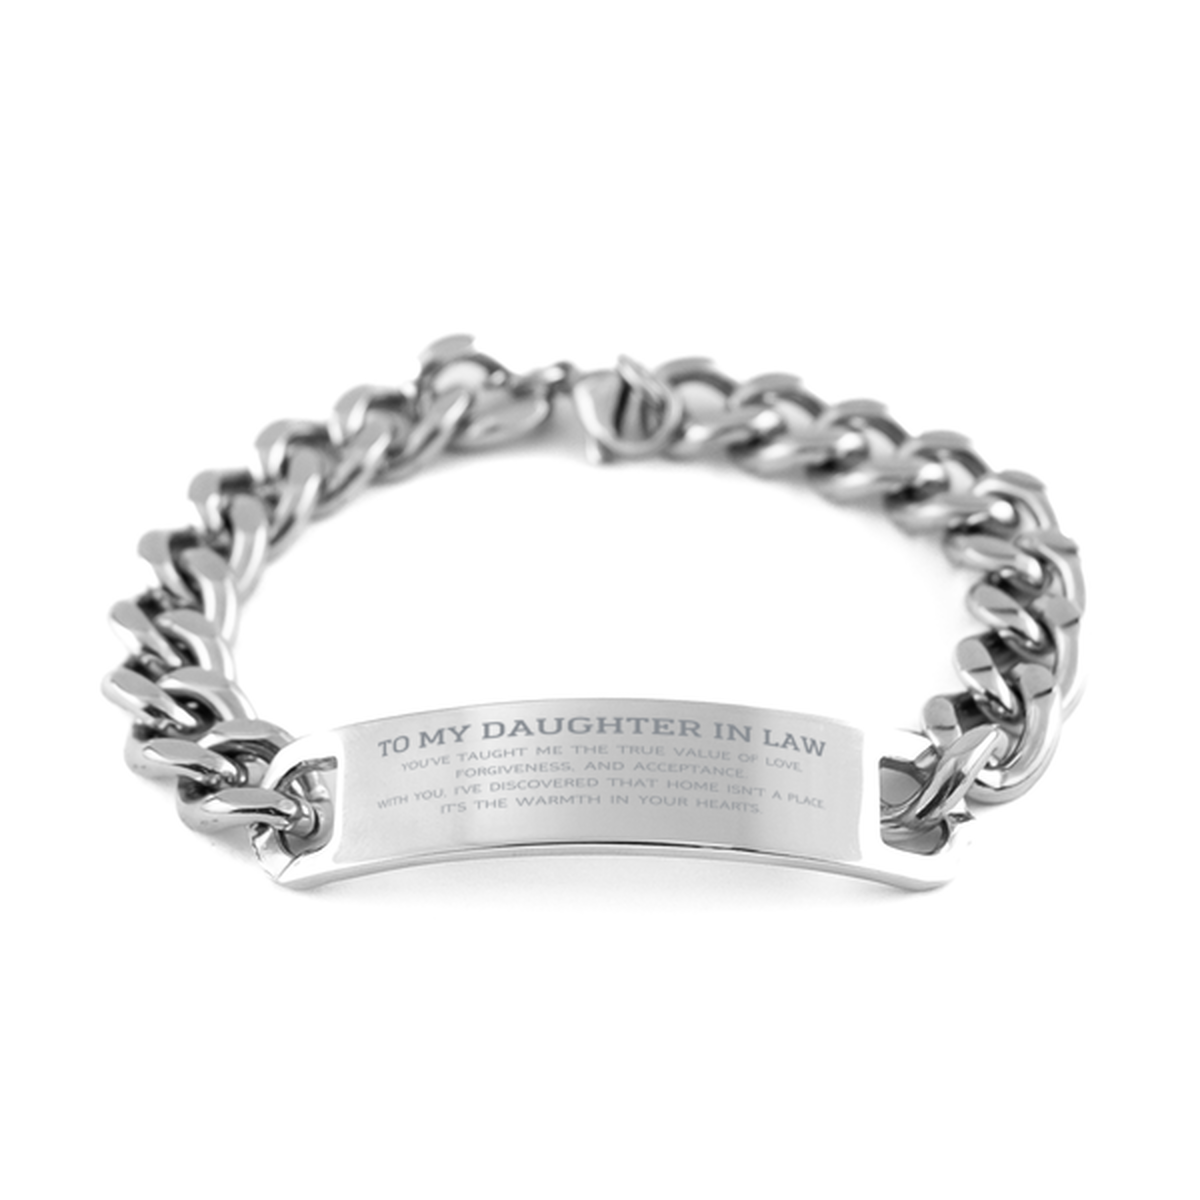 To My Daughter In Law Gifts, You've taught me the true value of love, Thank You Gifts For Daughter In Law, Birthday Cuban Chain Stainless Steel Bracelet For Daughter In Law